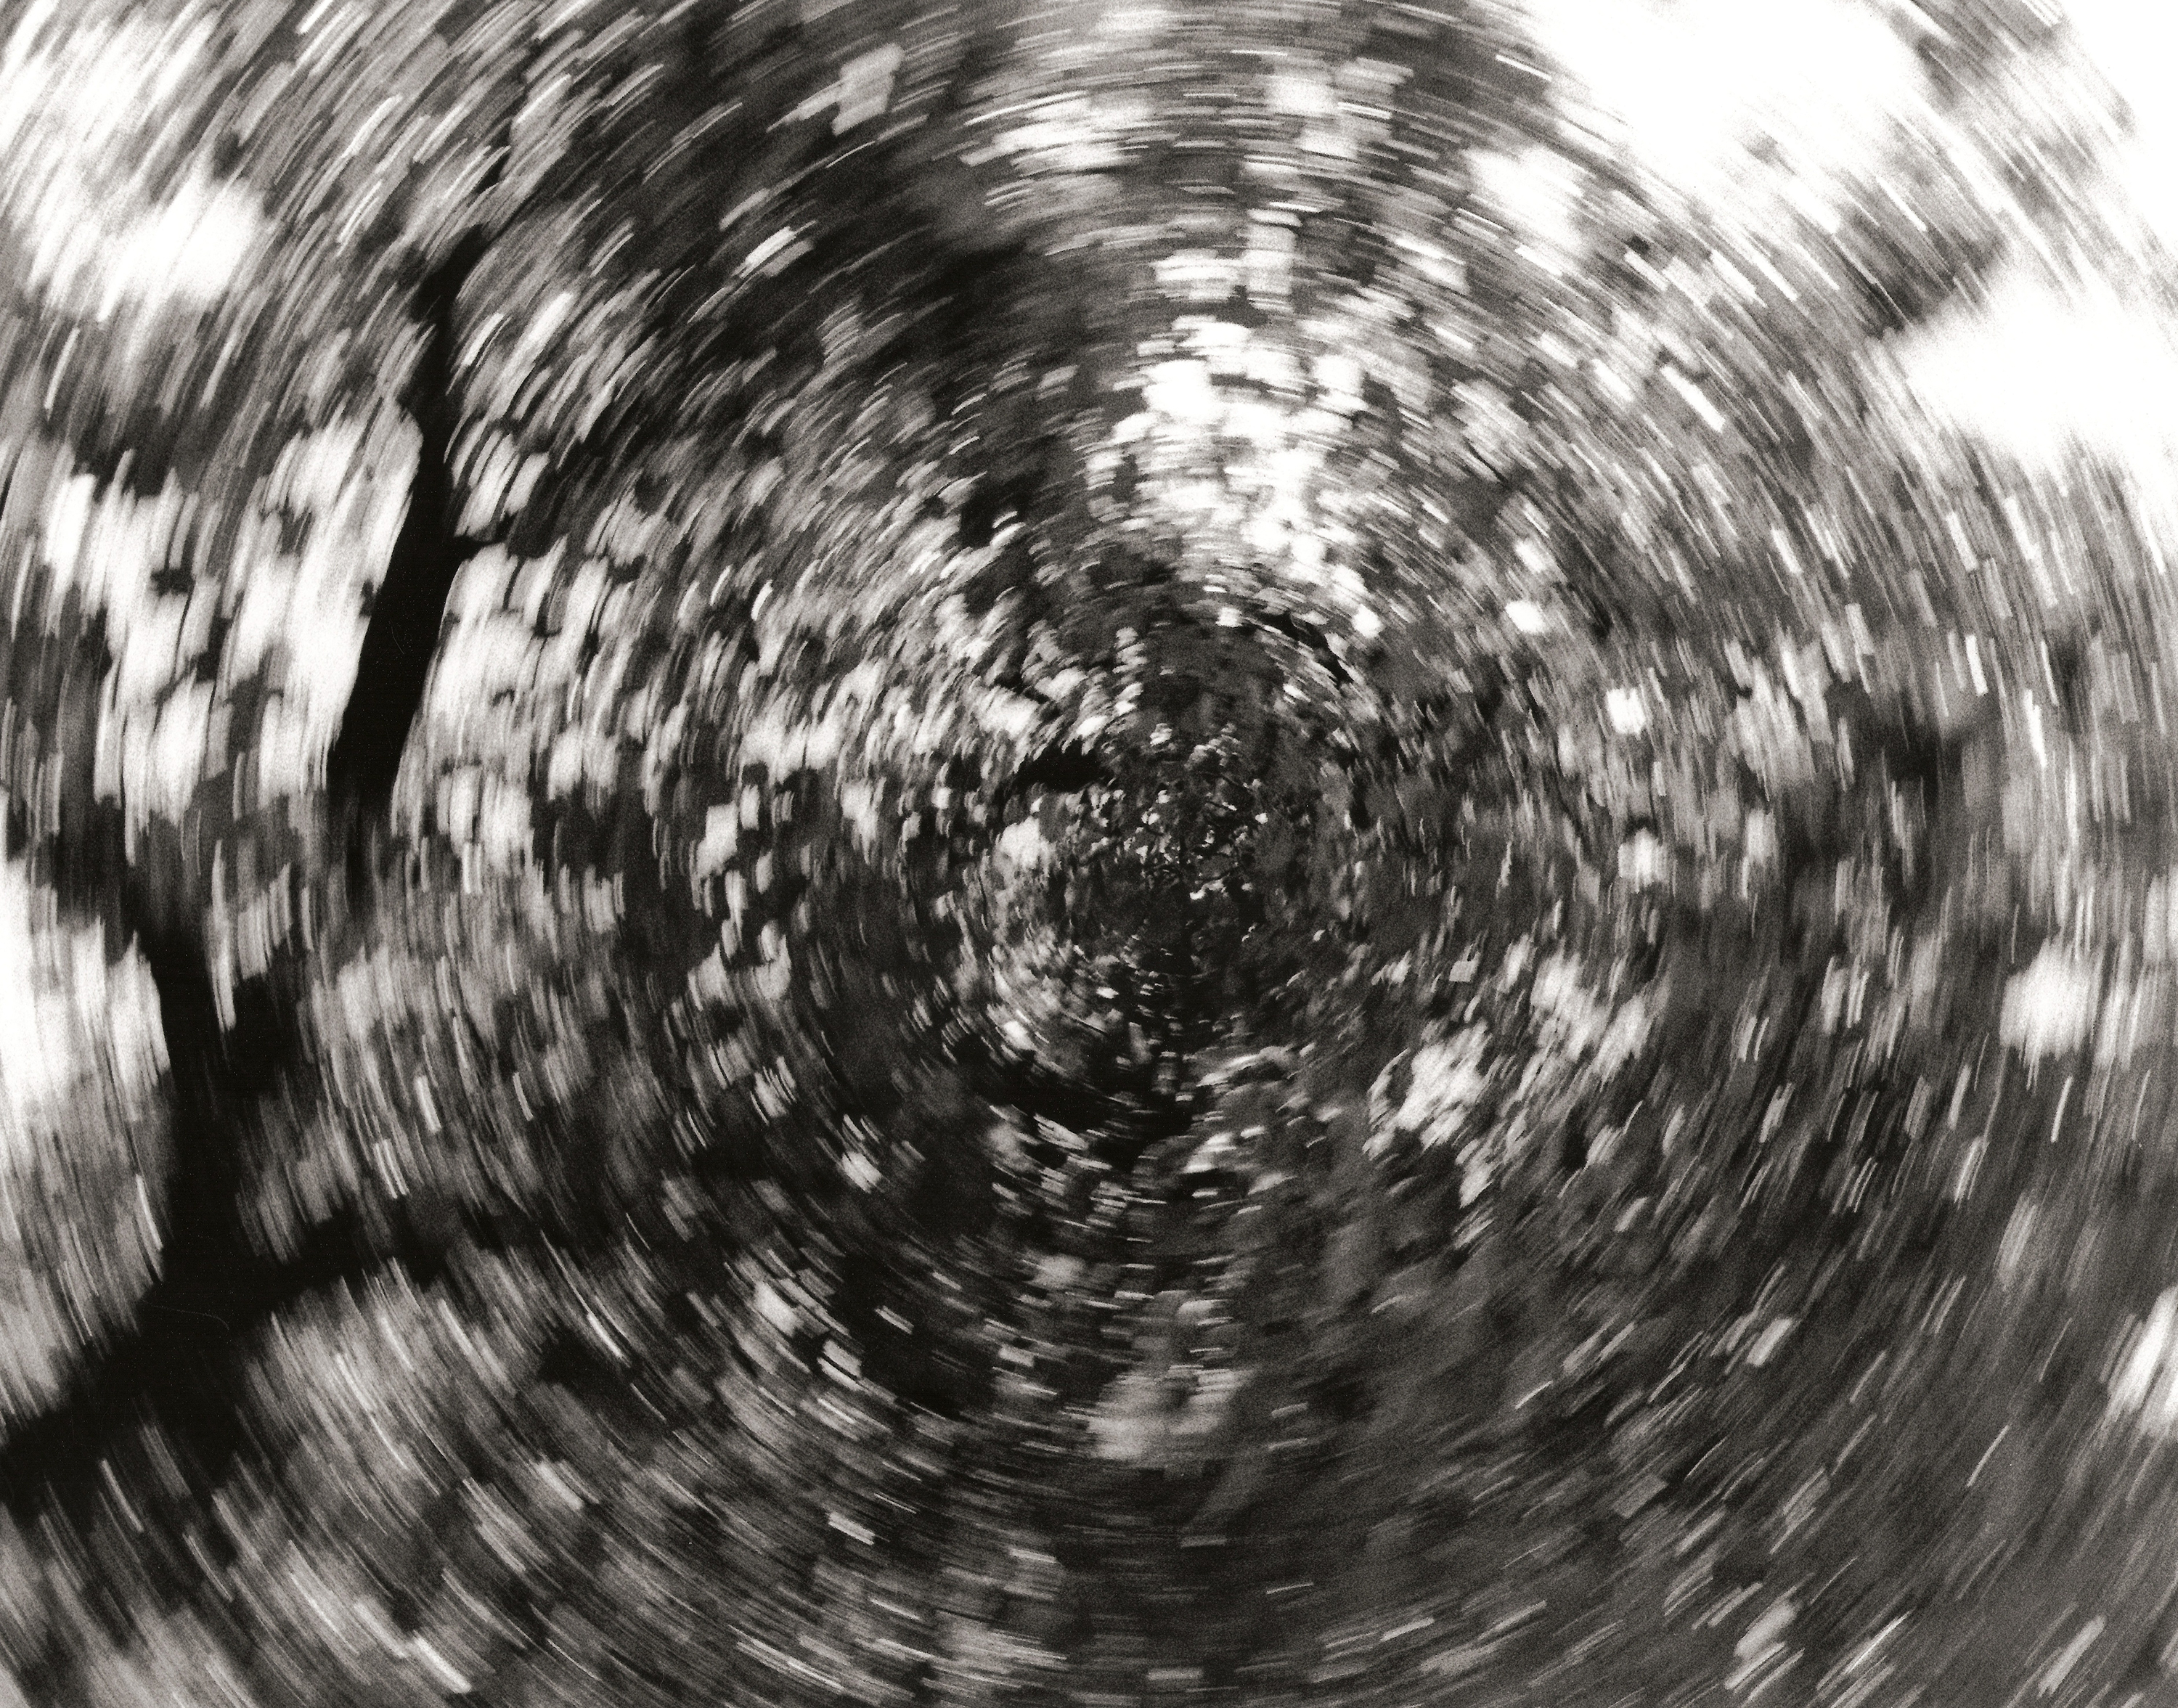 abstract tree blur by nick ares on flickr - Image Journal